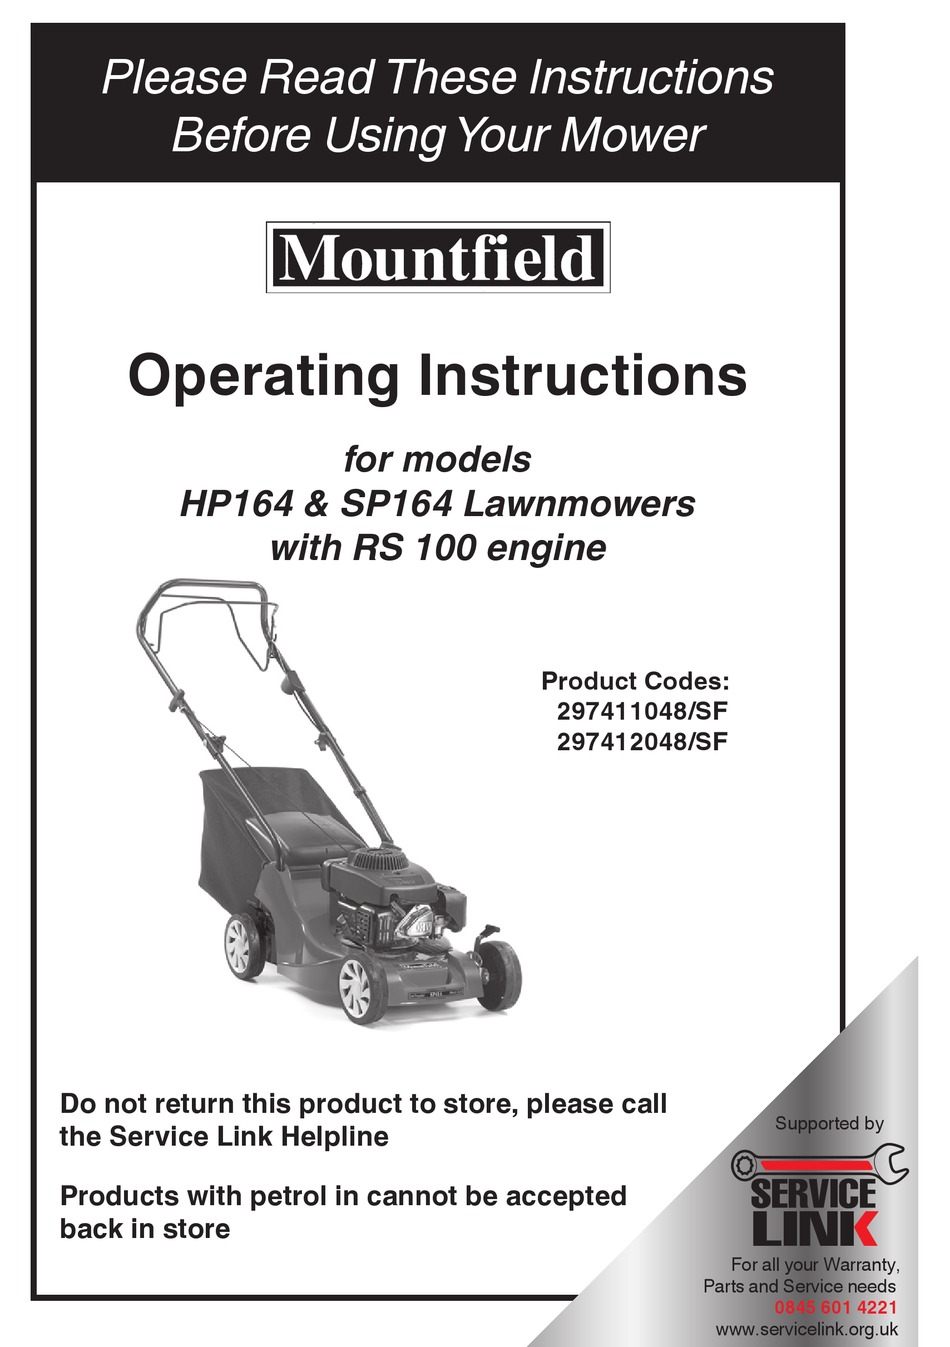 Mountfield Lawn Mower Service Kit Suitable for the RS100 Engine